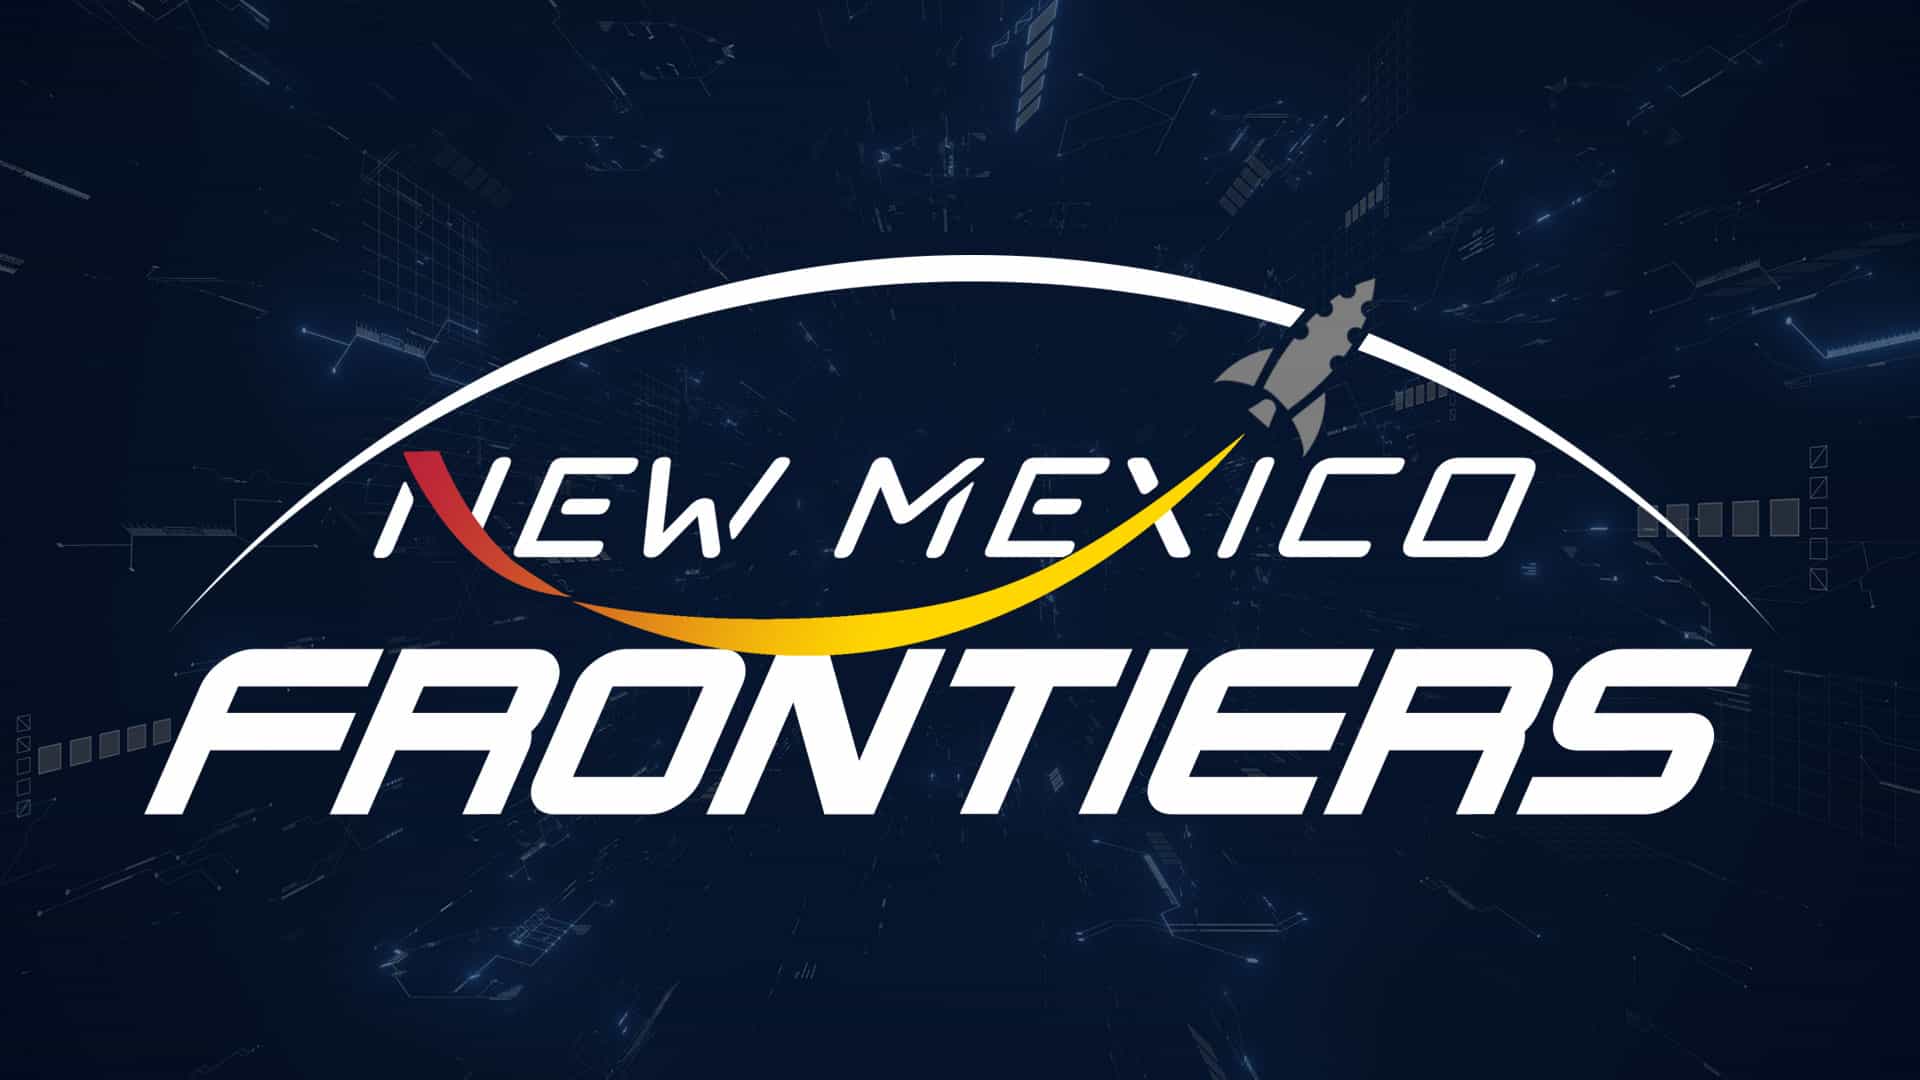 New Mexico Frontiers